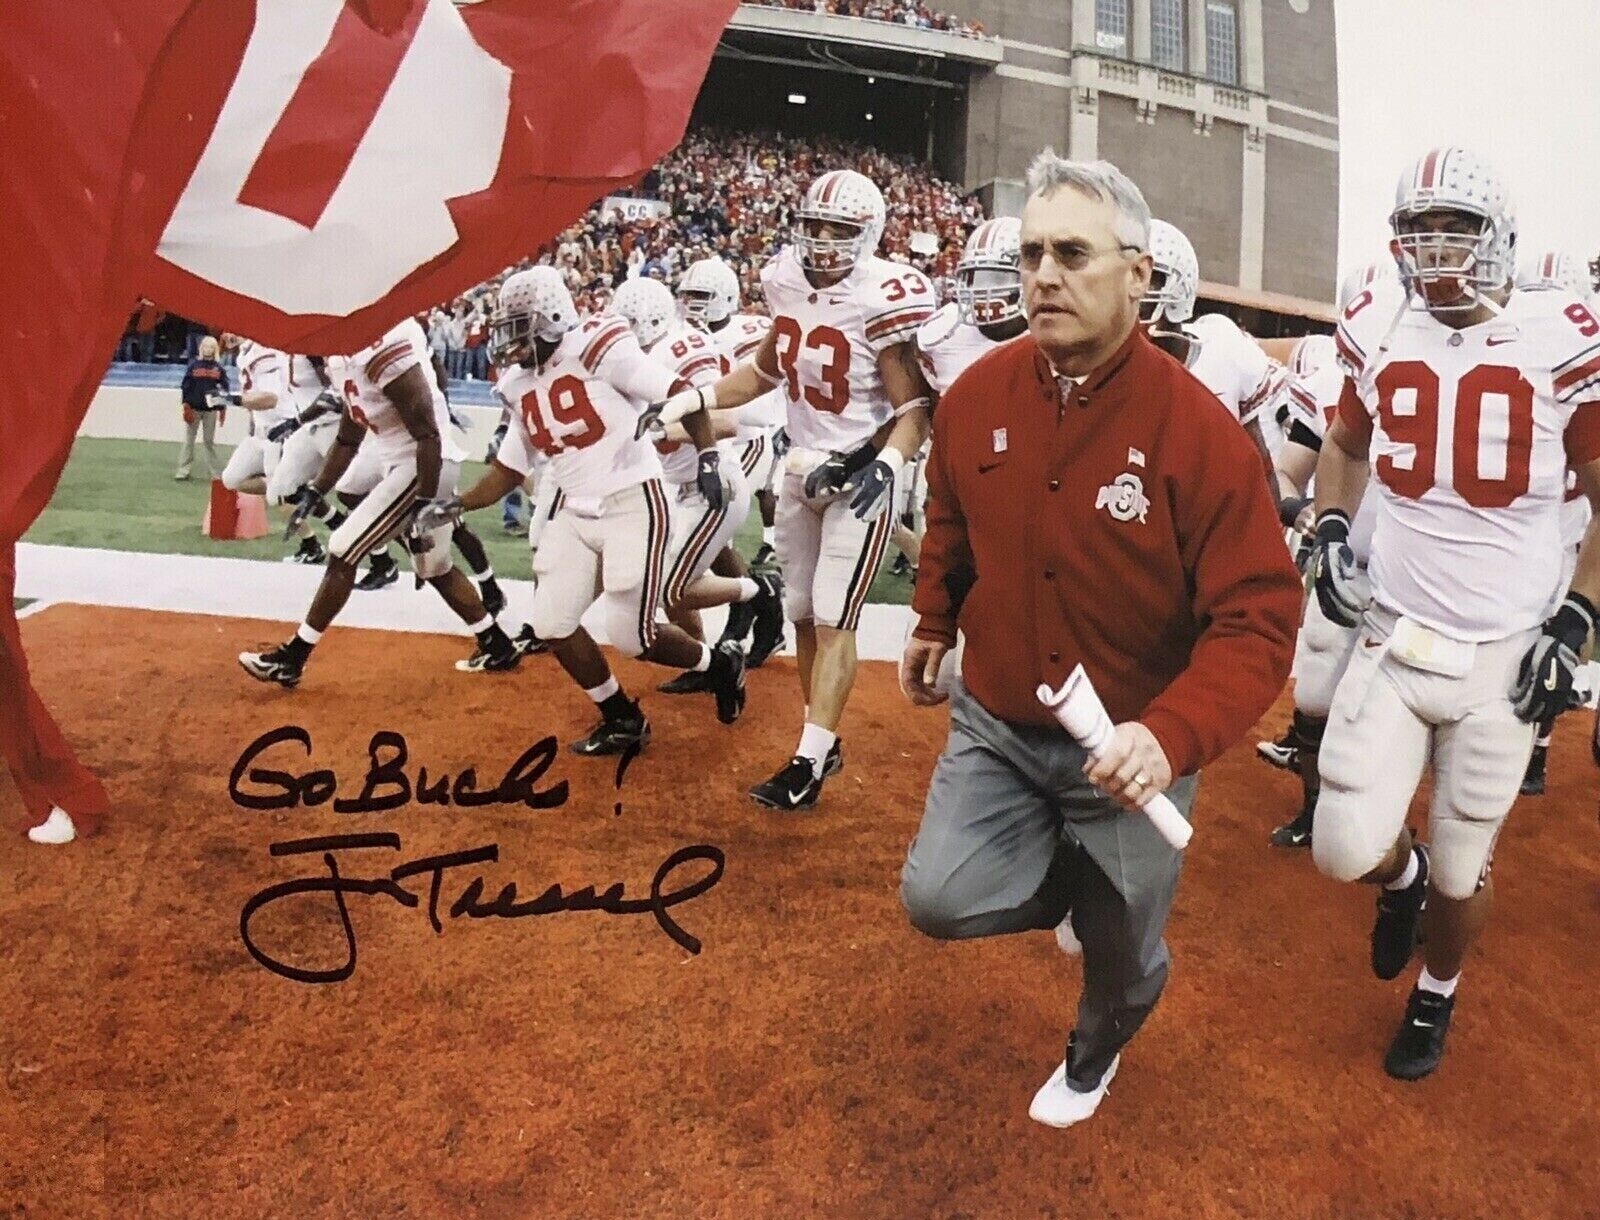 Jim Tressel Autographed Signed 8x10 Photo Poster painting ( Ohio State Buckeyes ) REPRINT